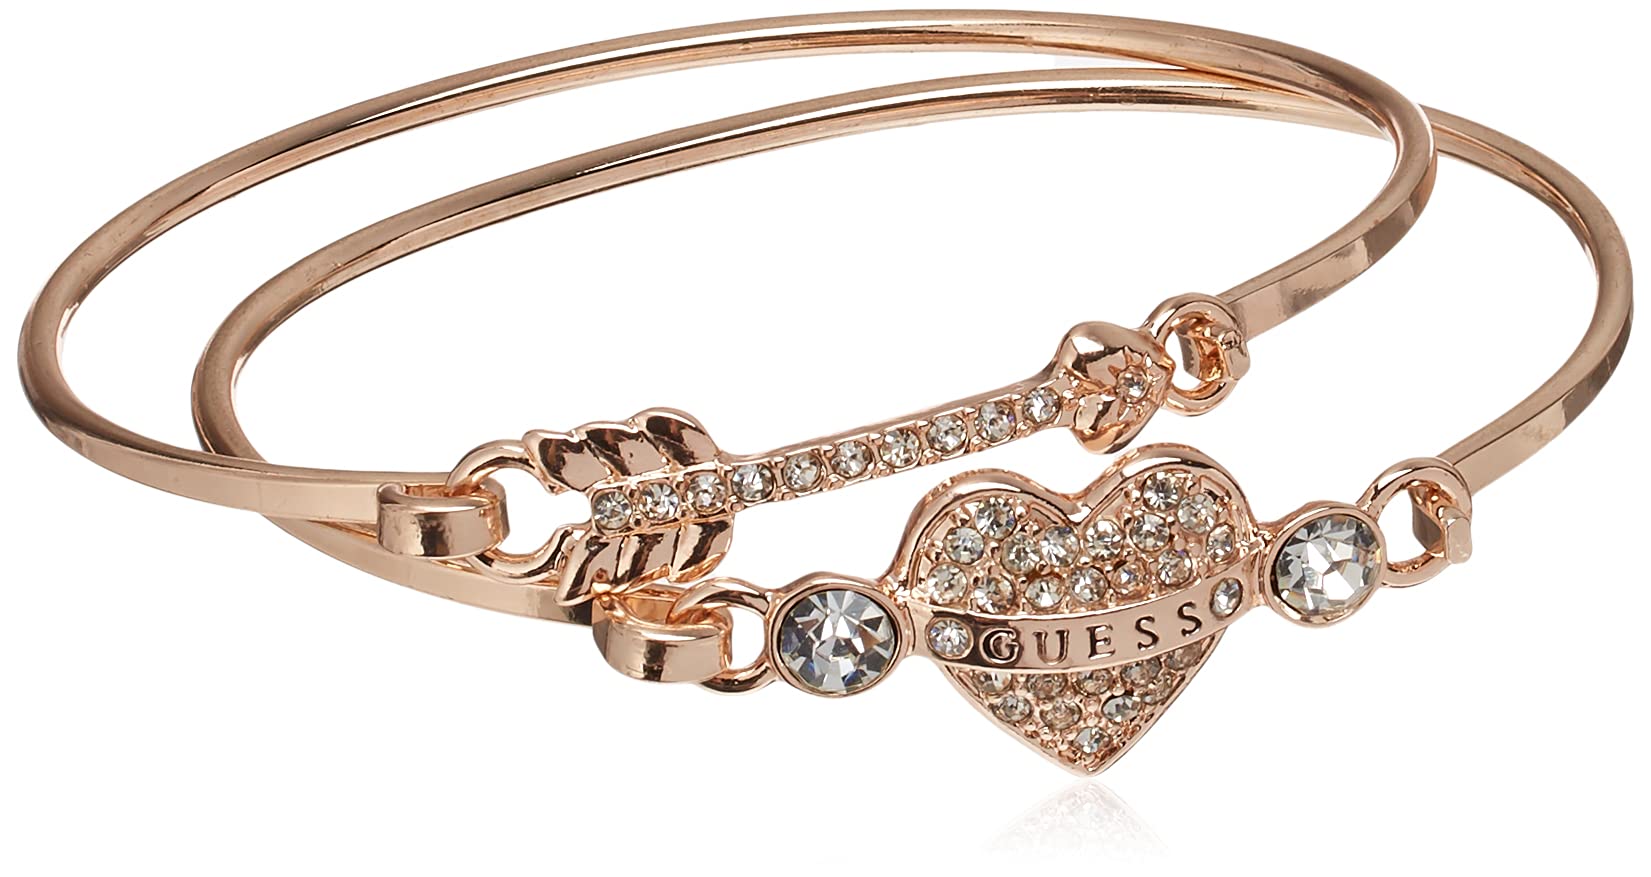 GUESS Women's Tension Bracelet Duo, Rose Gold, One Size